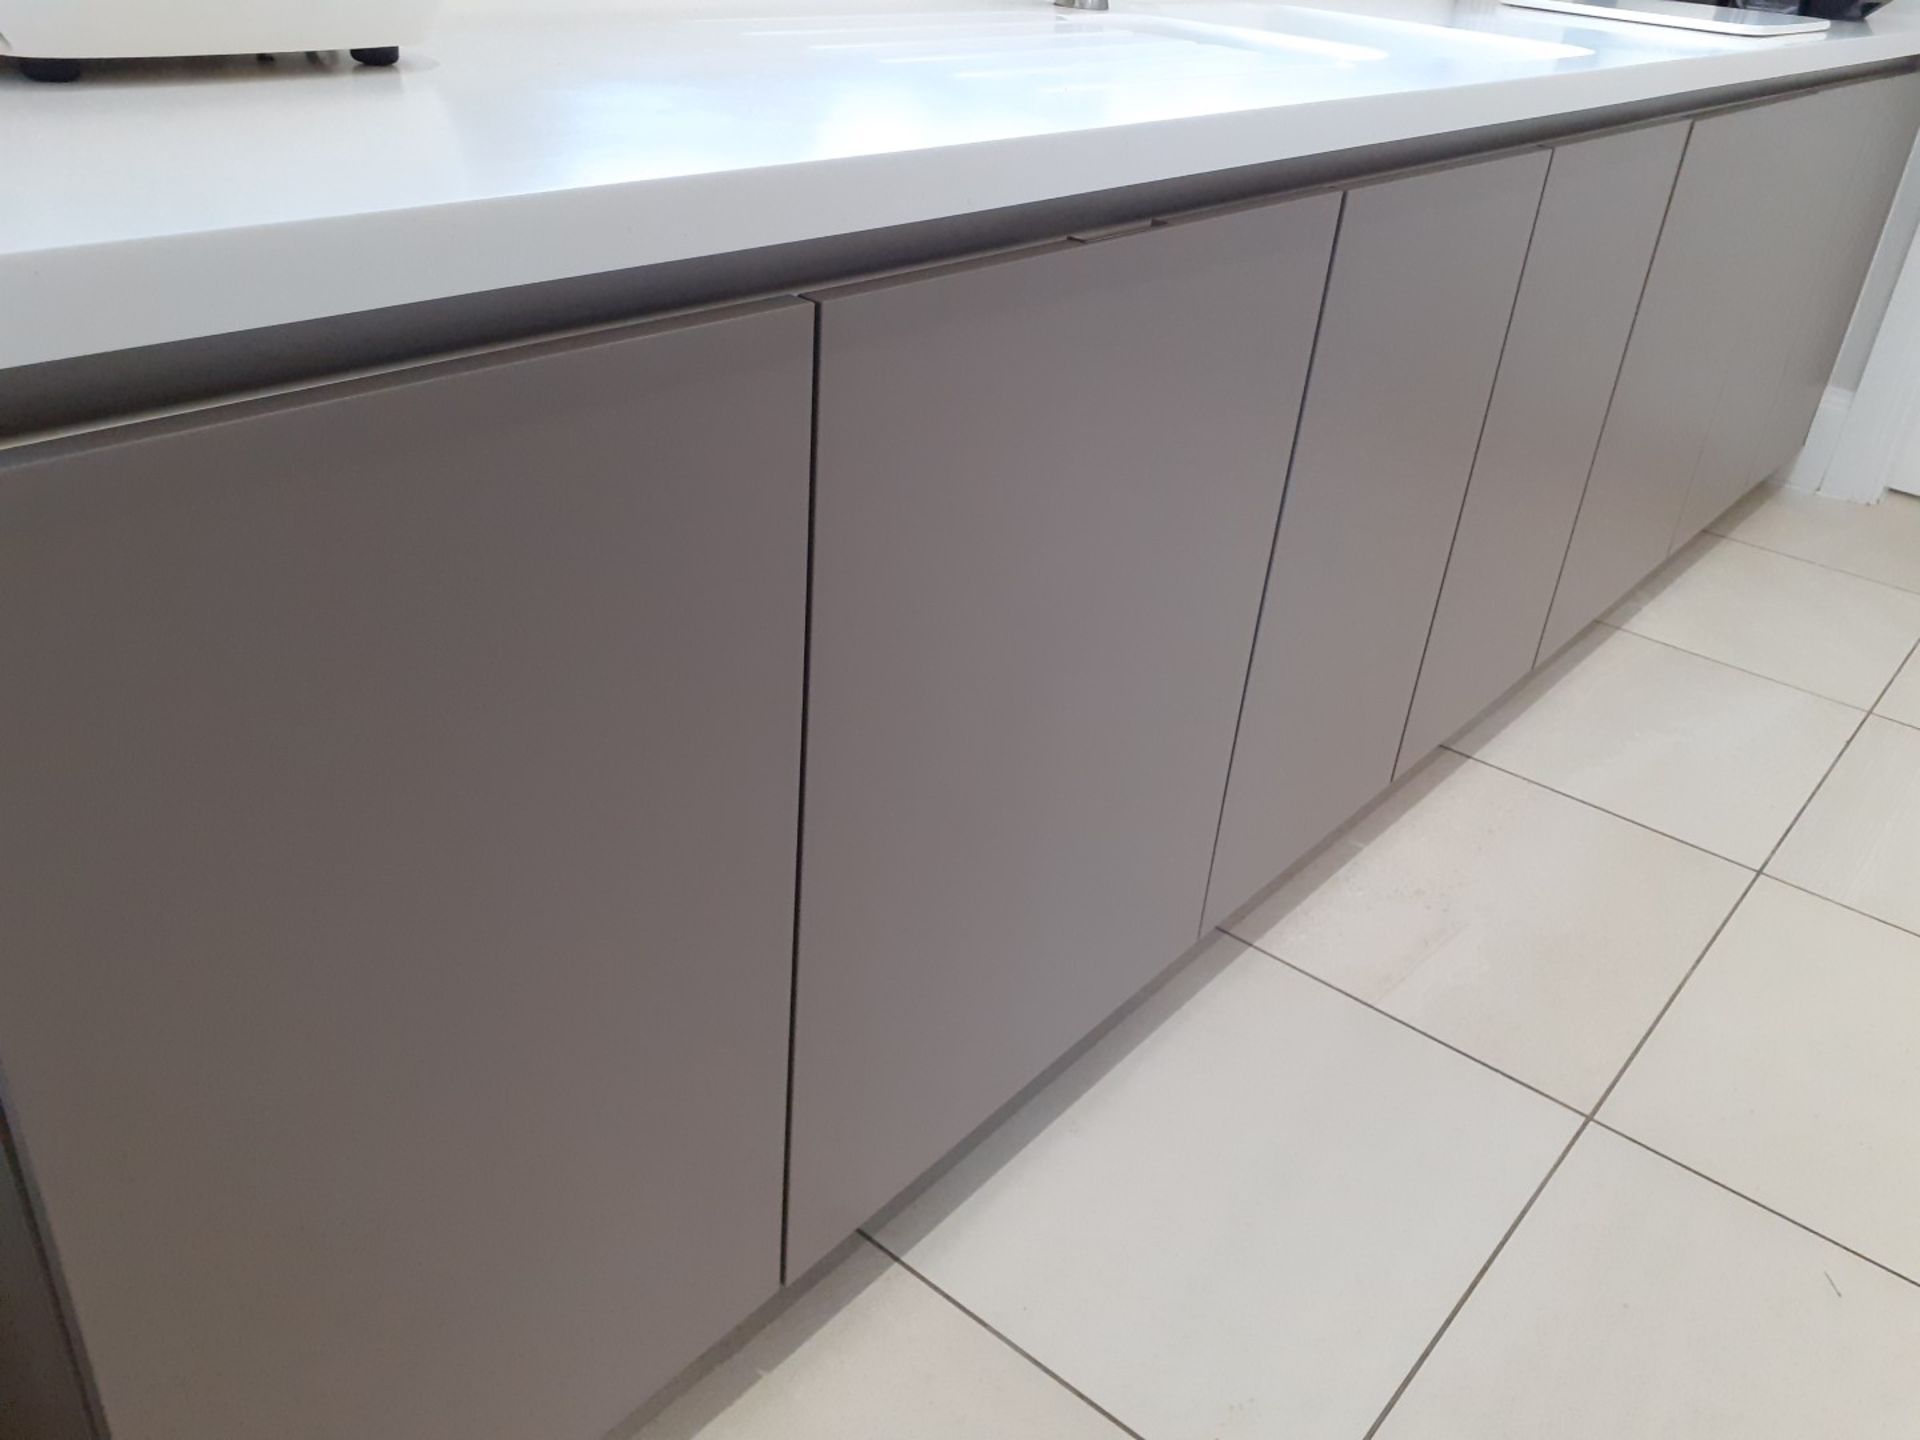 1 x SieMatic Handleless Fitted Kitchen With Intergrated NEFF Appliances, Corian Worktops And Island - Image 71 of 92